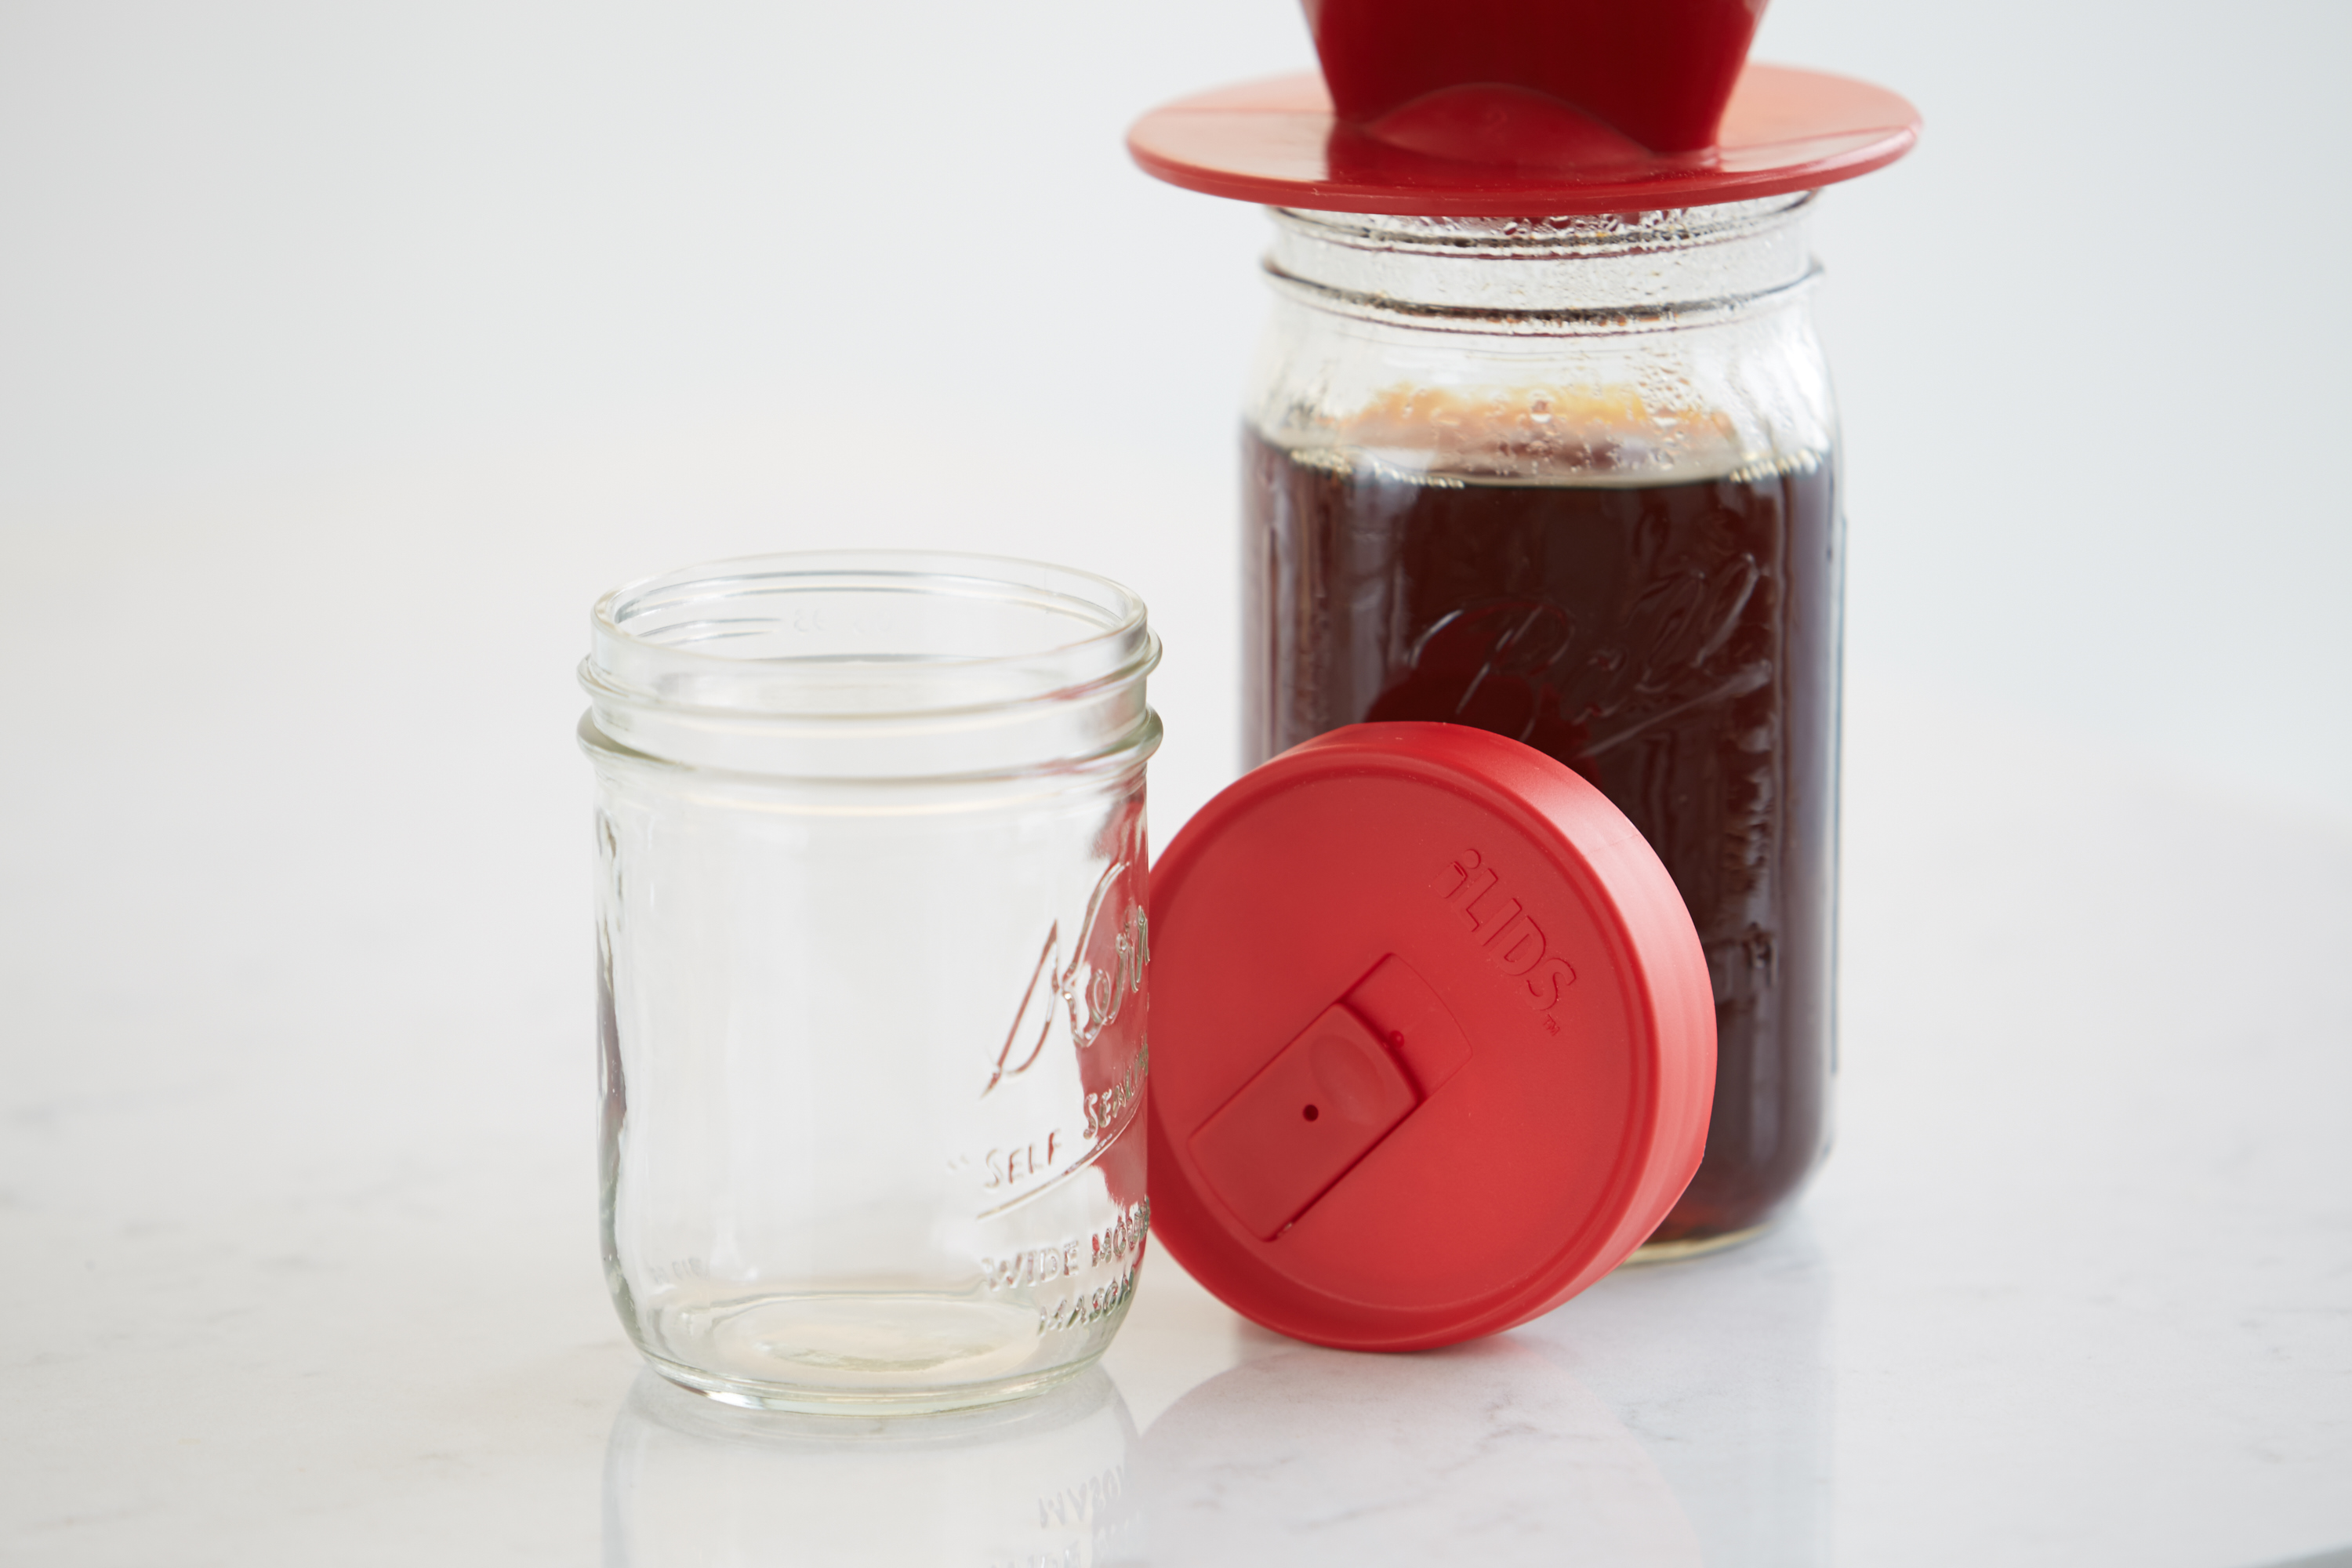 Best Mason Jar Lids for Food and Drinks